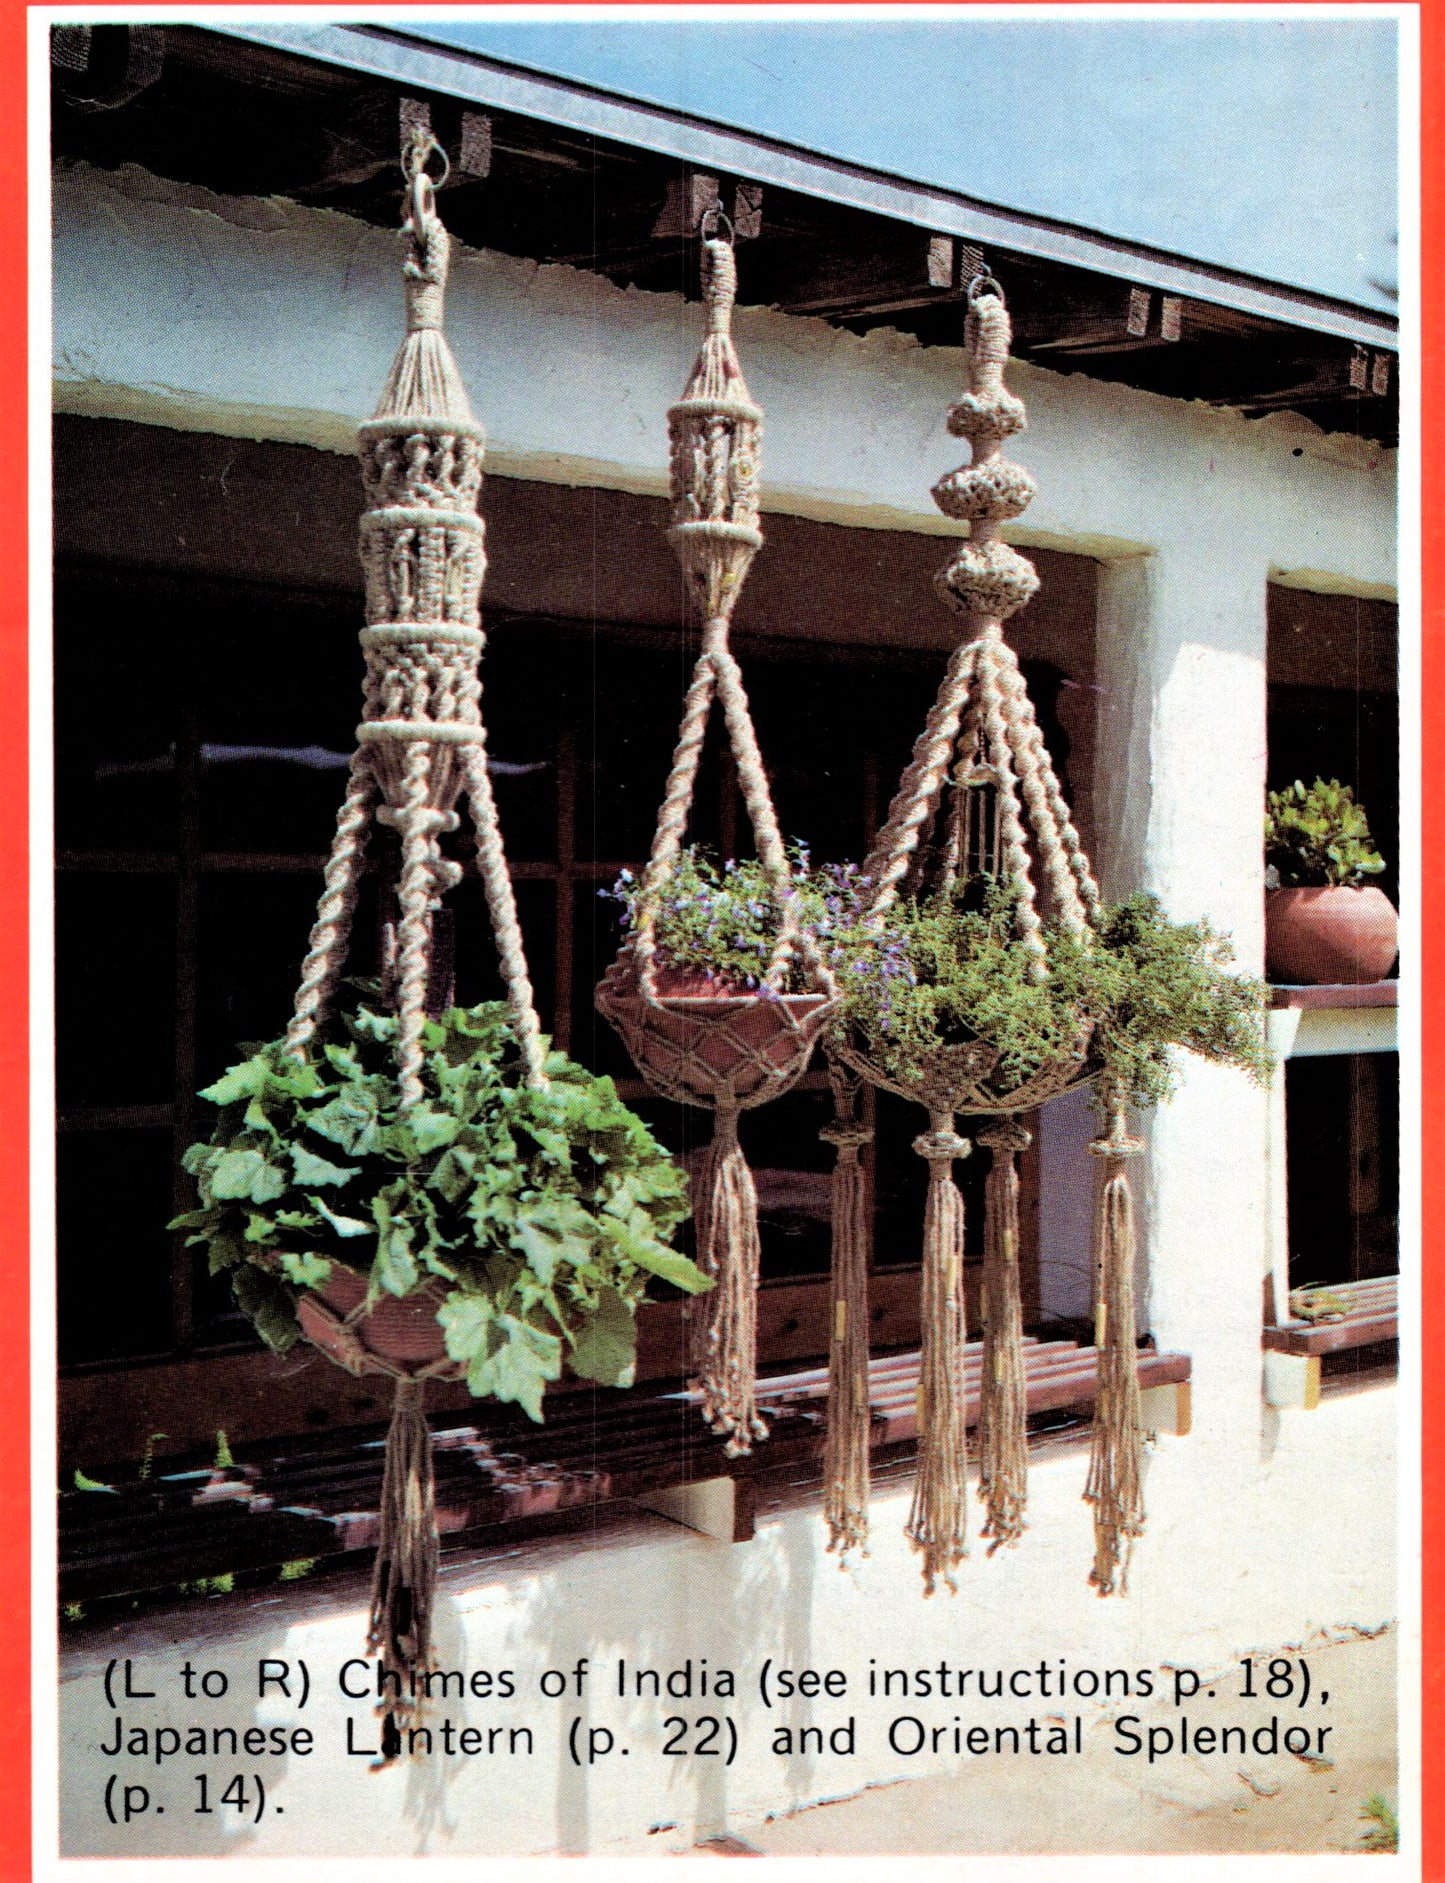 Macrame Hangers Patterns Plant Holders Hangings Knots Knotted Weaving Download PDF Instructions Home Decorating - At Grandma's Table